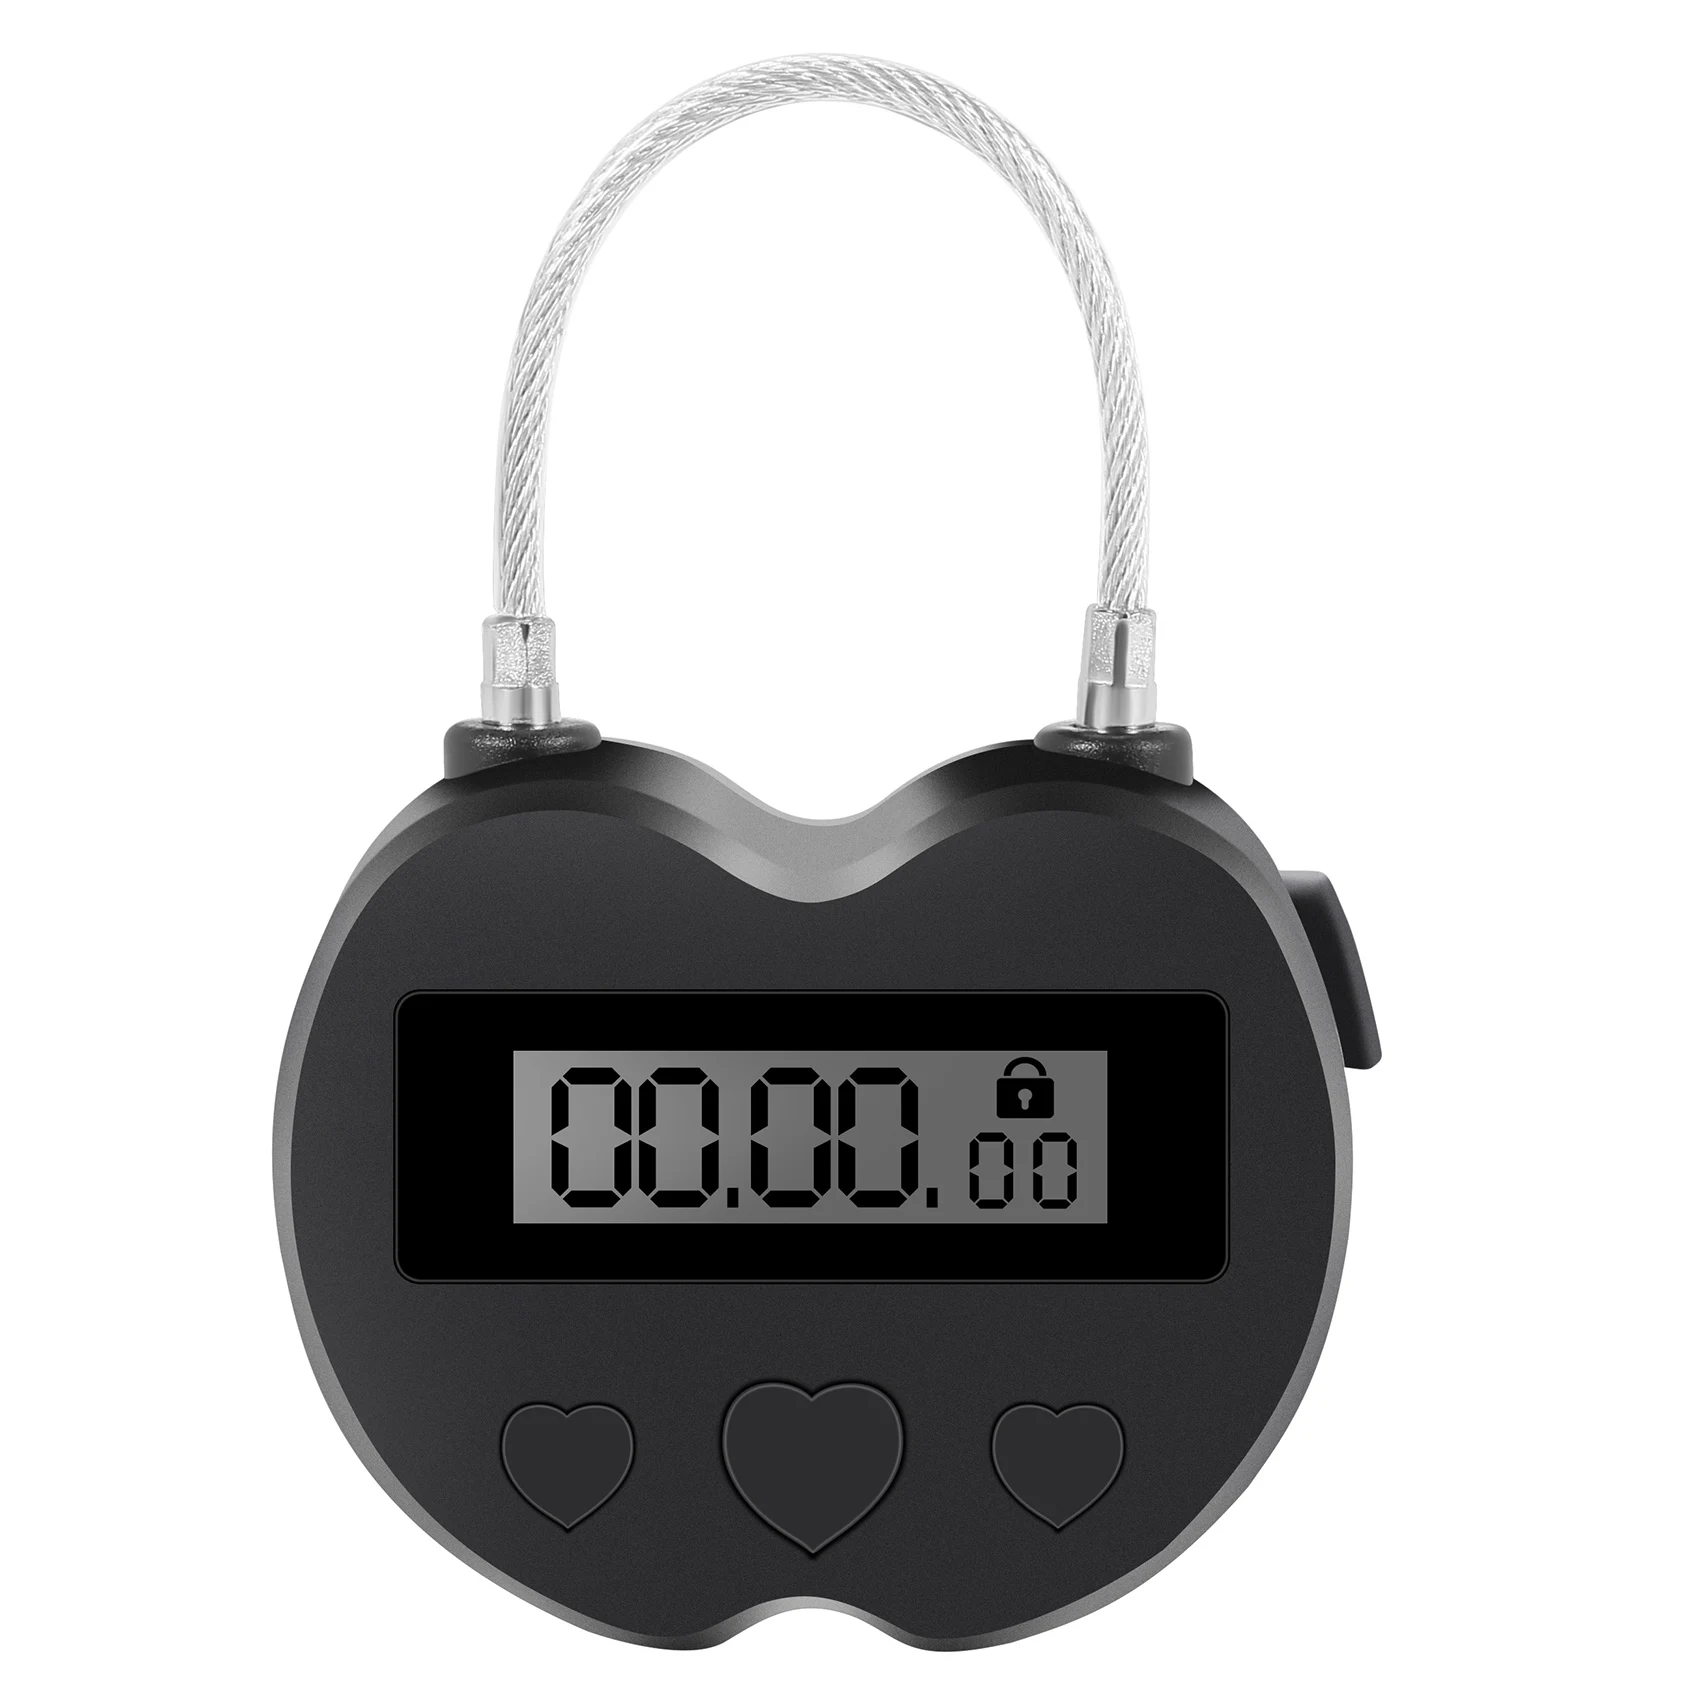 

Smart Time Lock LCD Display Time Lock Multifunction Travel Electronic Timer, Waterproof USB Rechargeable Temporary Timer Padlock